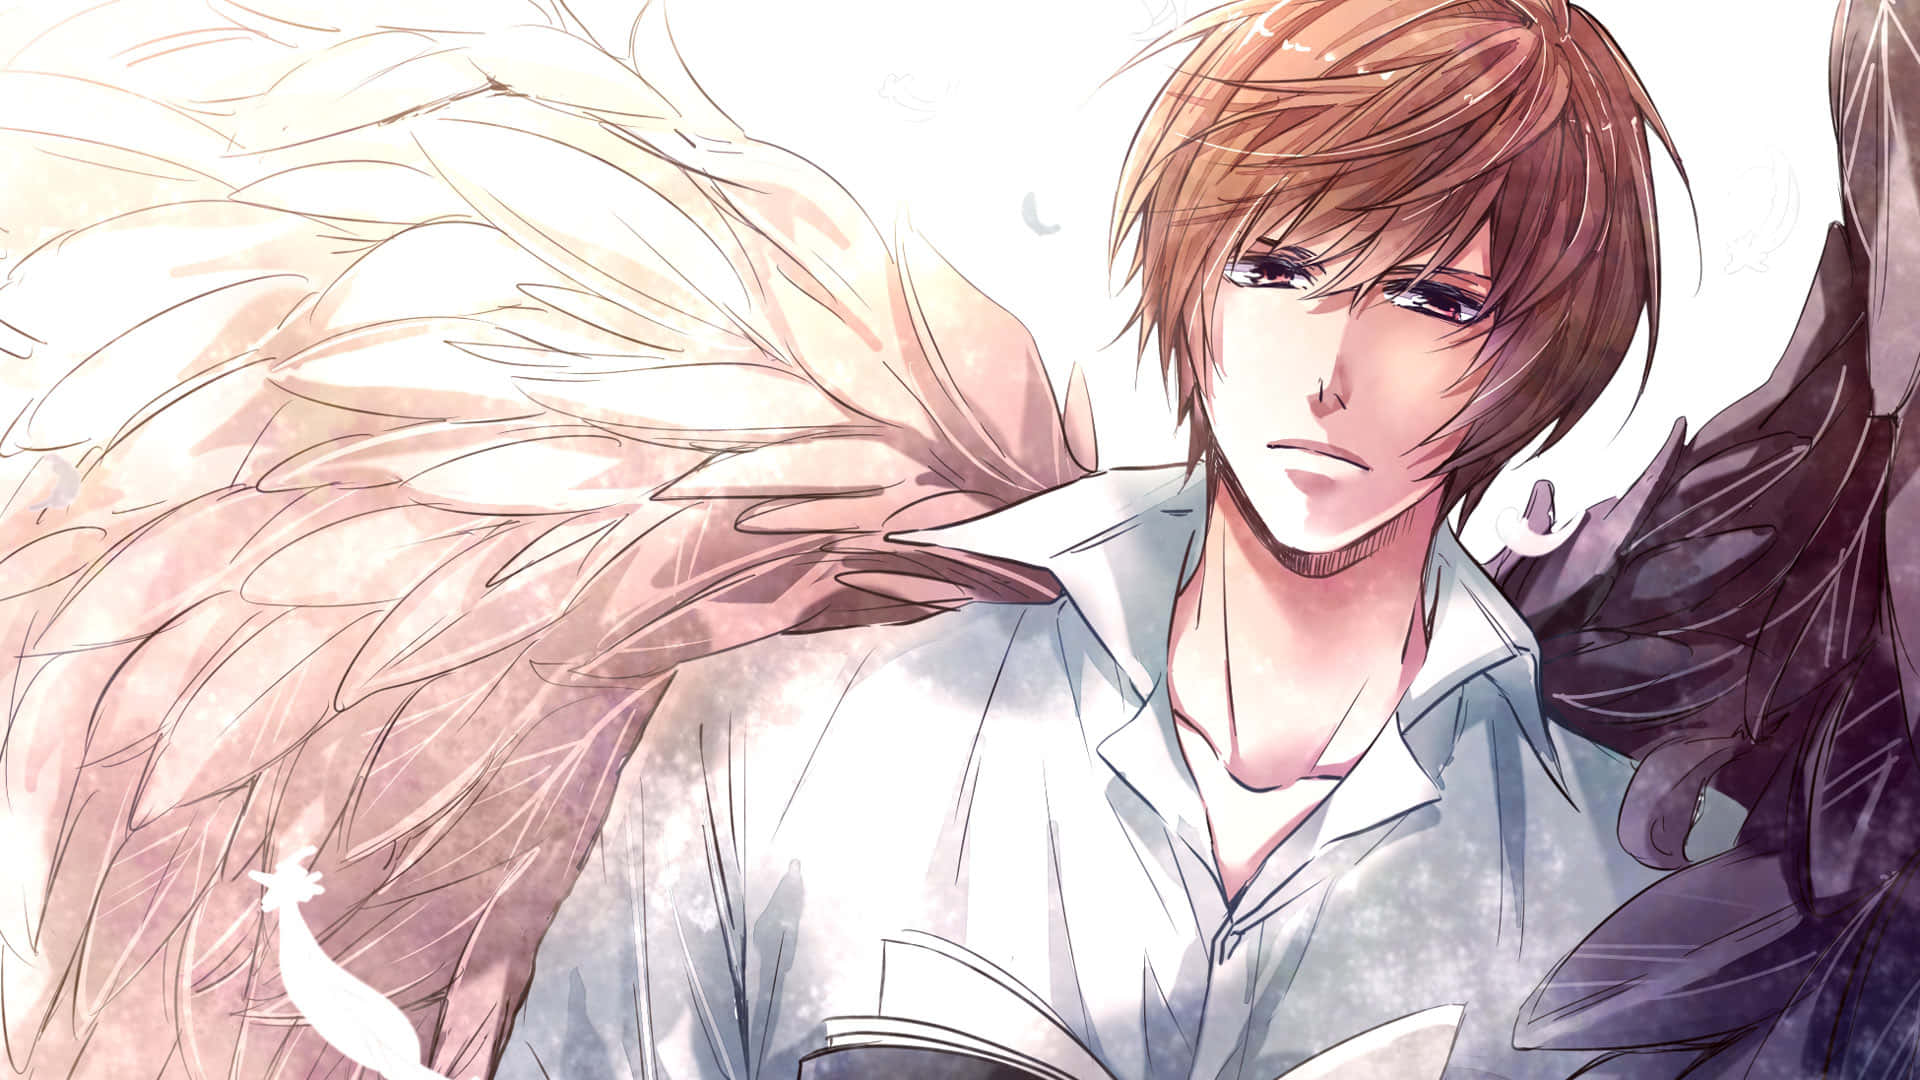 Light Yagami, star of the popular manga and anime series Death Note.